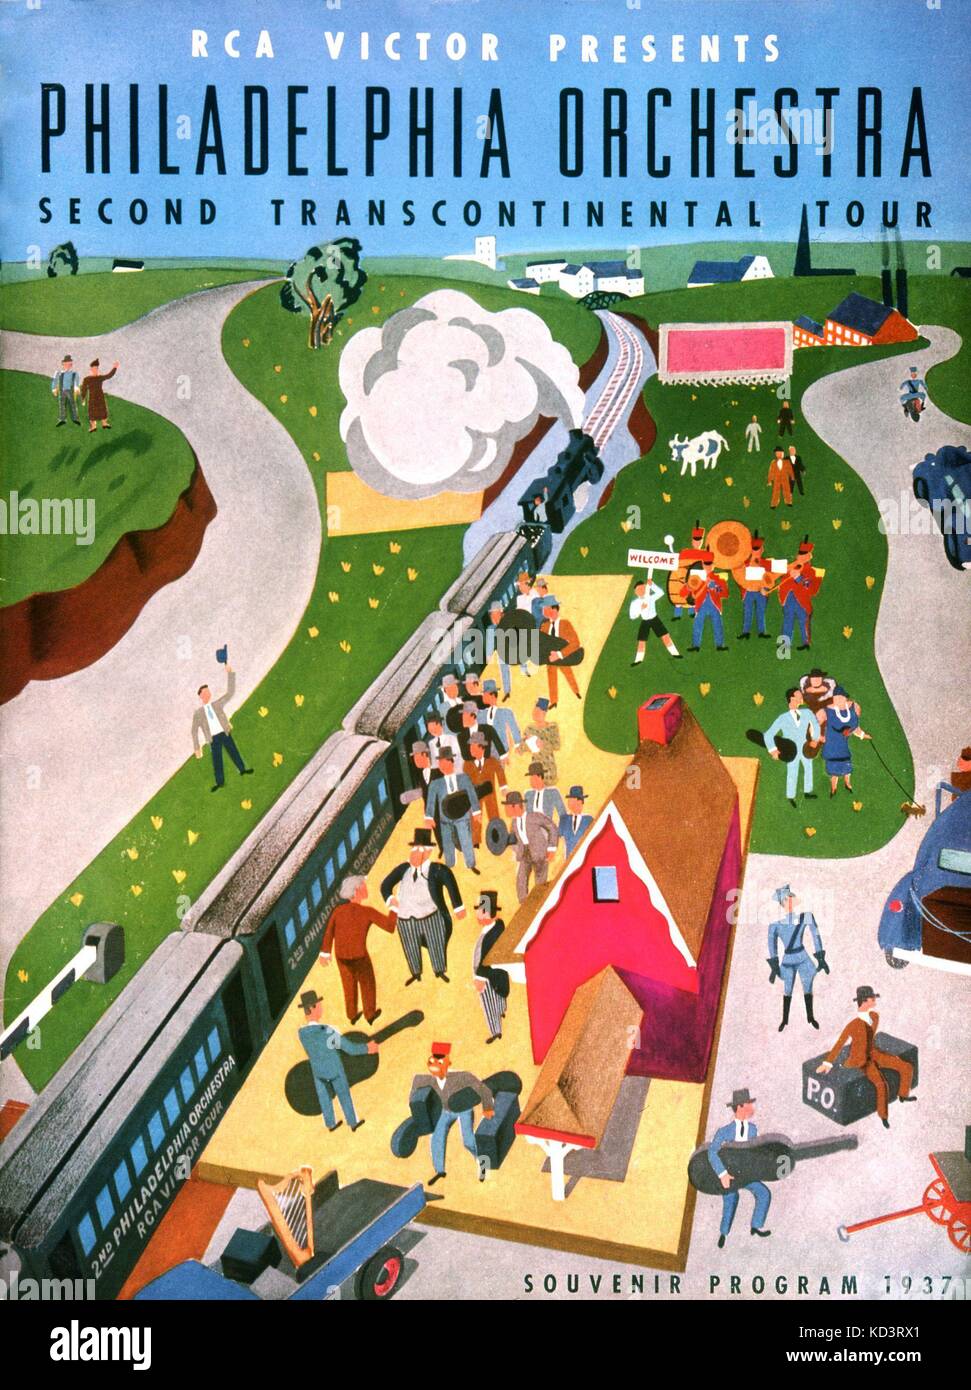 ORCHESTRA - Philadelphia Orchestra Souvenir programme, 1937.  Second transcontinental tour, Orchestra carrying instruments on tour arriving by train in Middle American railway station. (RCA Victor) Stock Photo